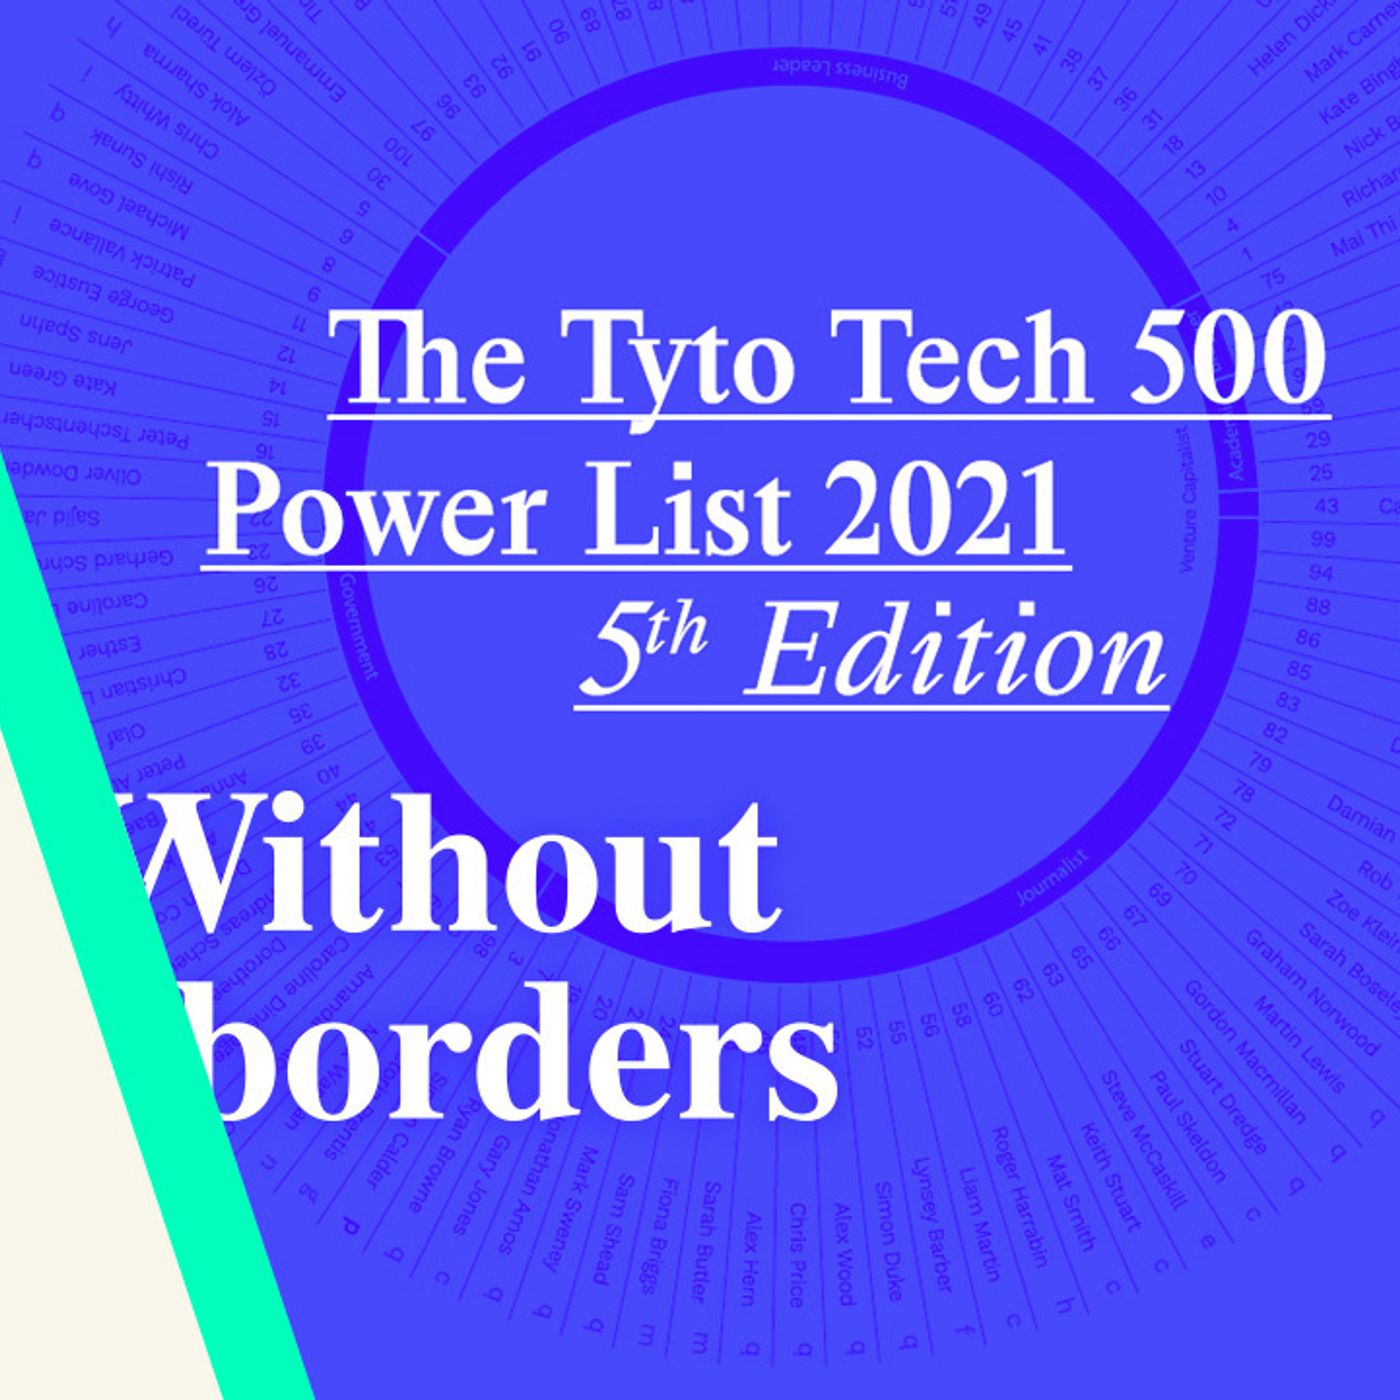 S2 Ep30: Tech 500: 2021 top influencers & trends